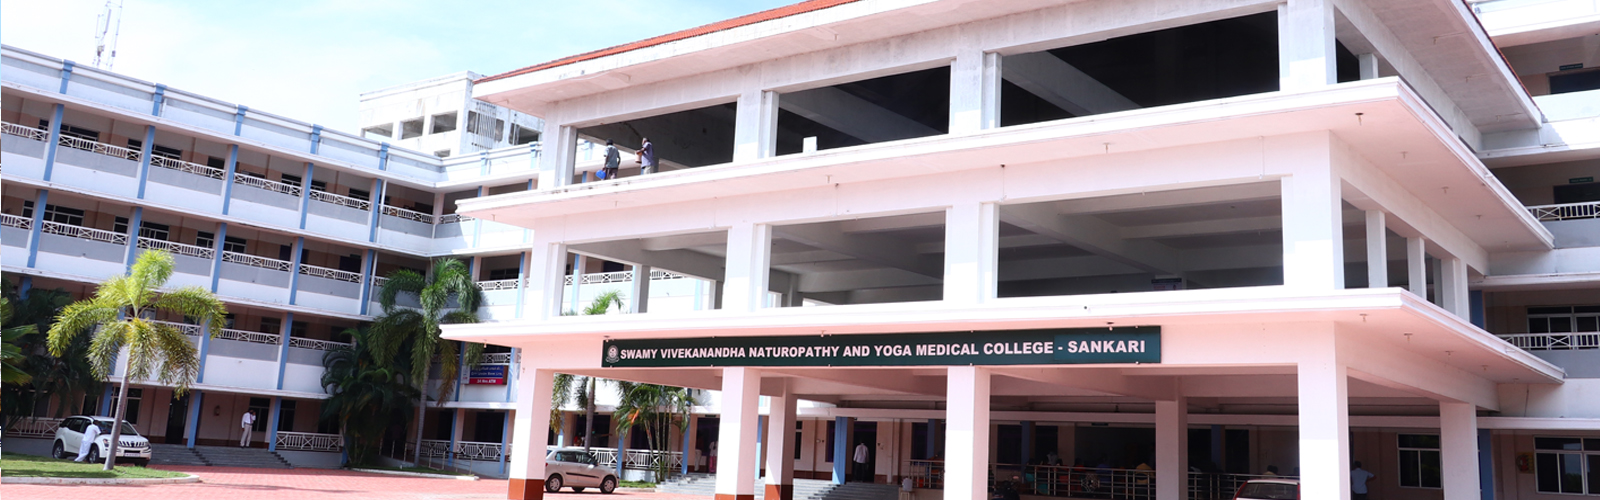 Swami Vivekananda Naturopathy and Yoga Medical College Salem Admissions, Courses Offered, Fees